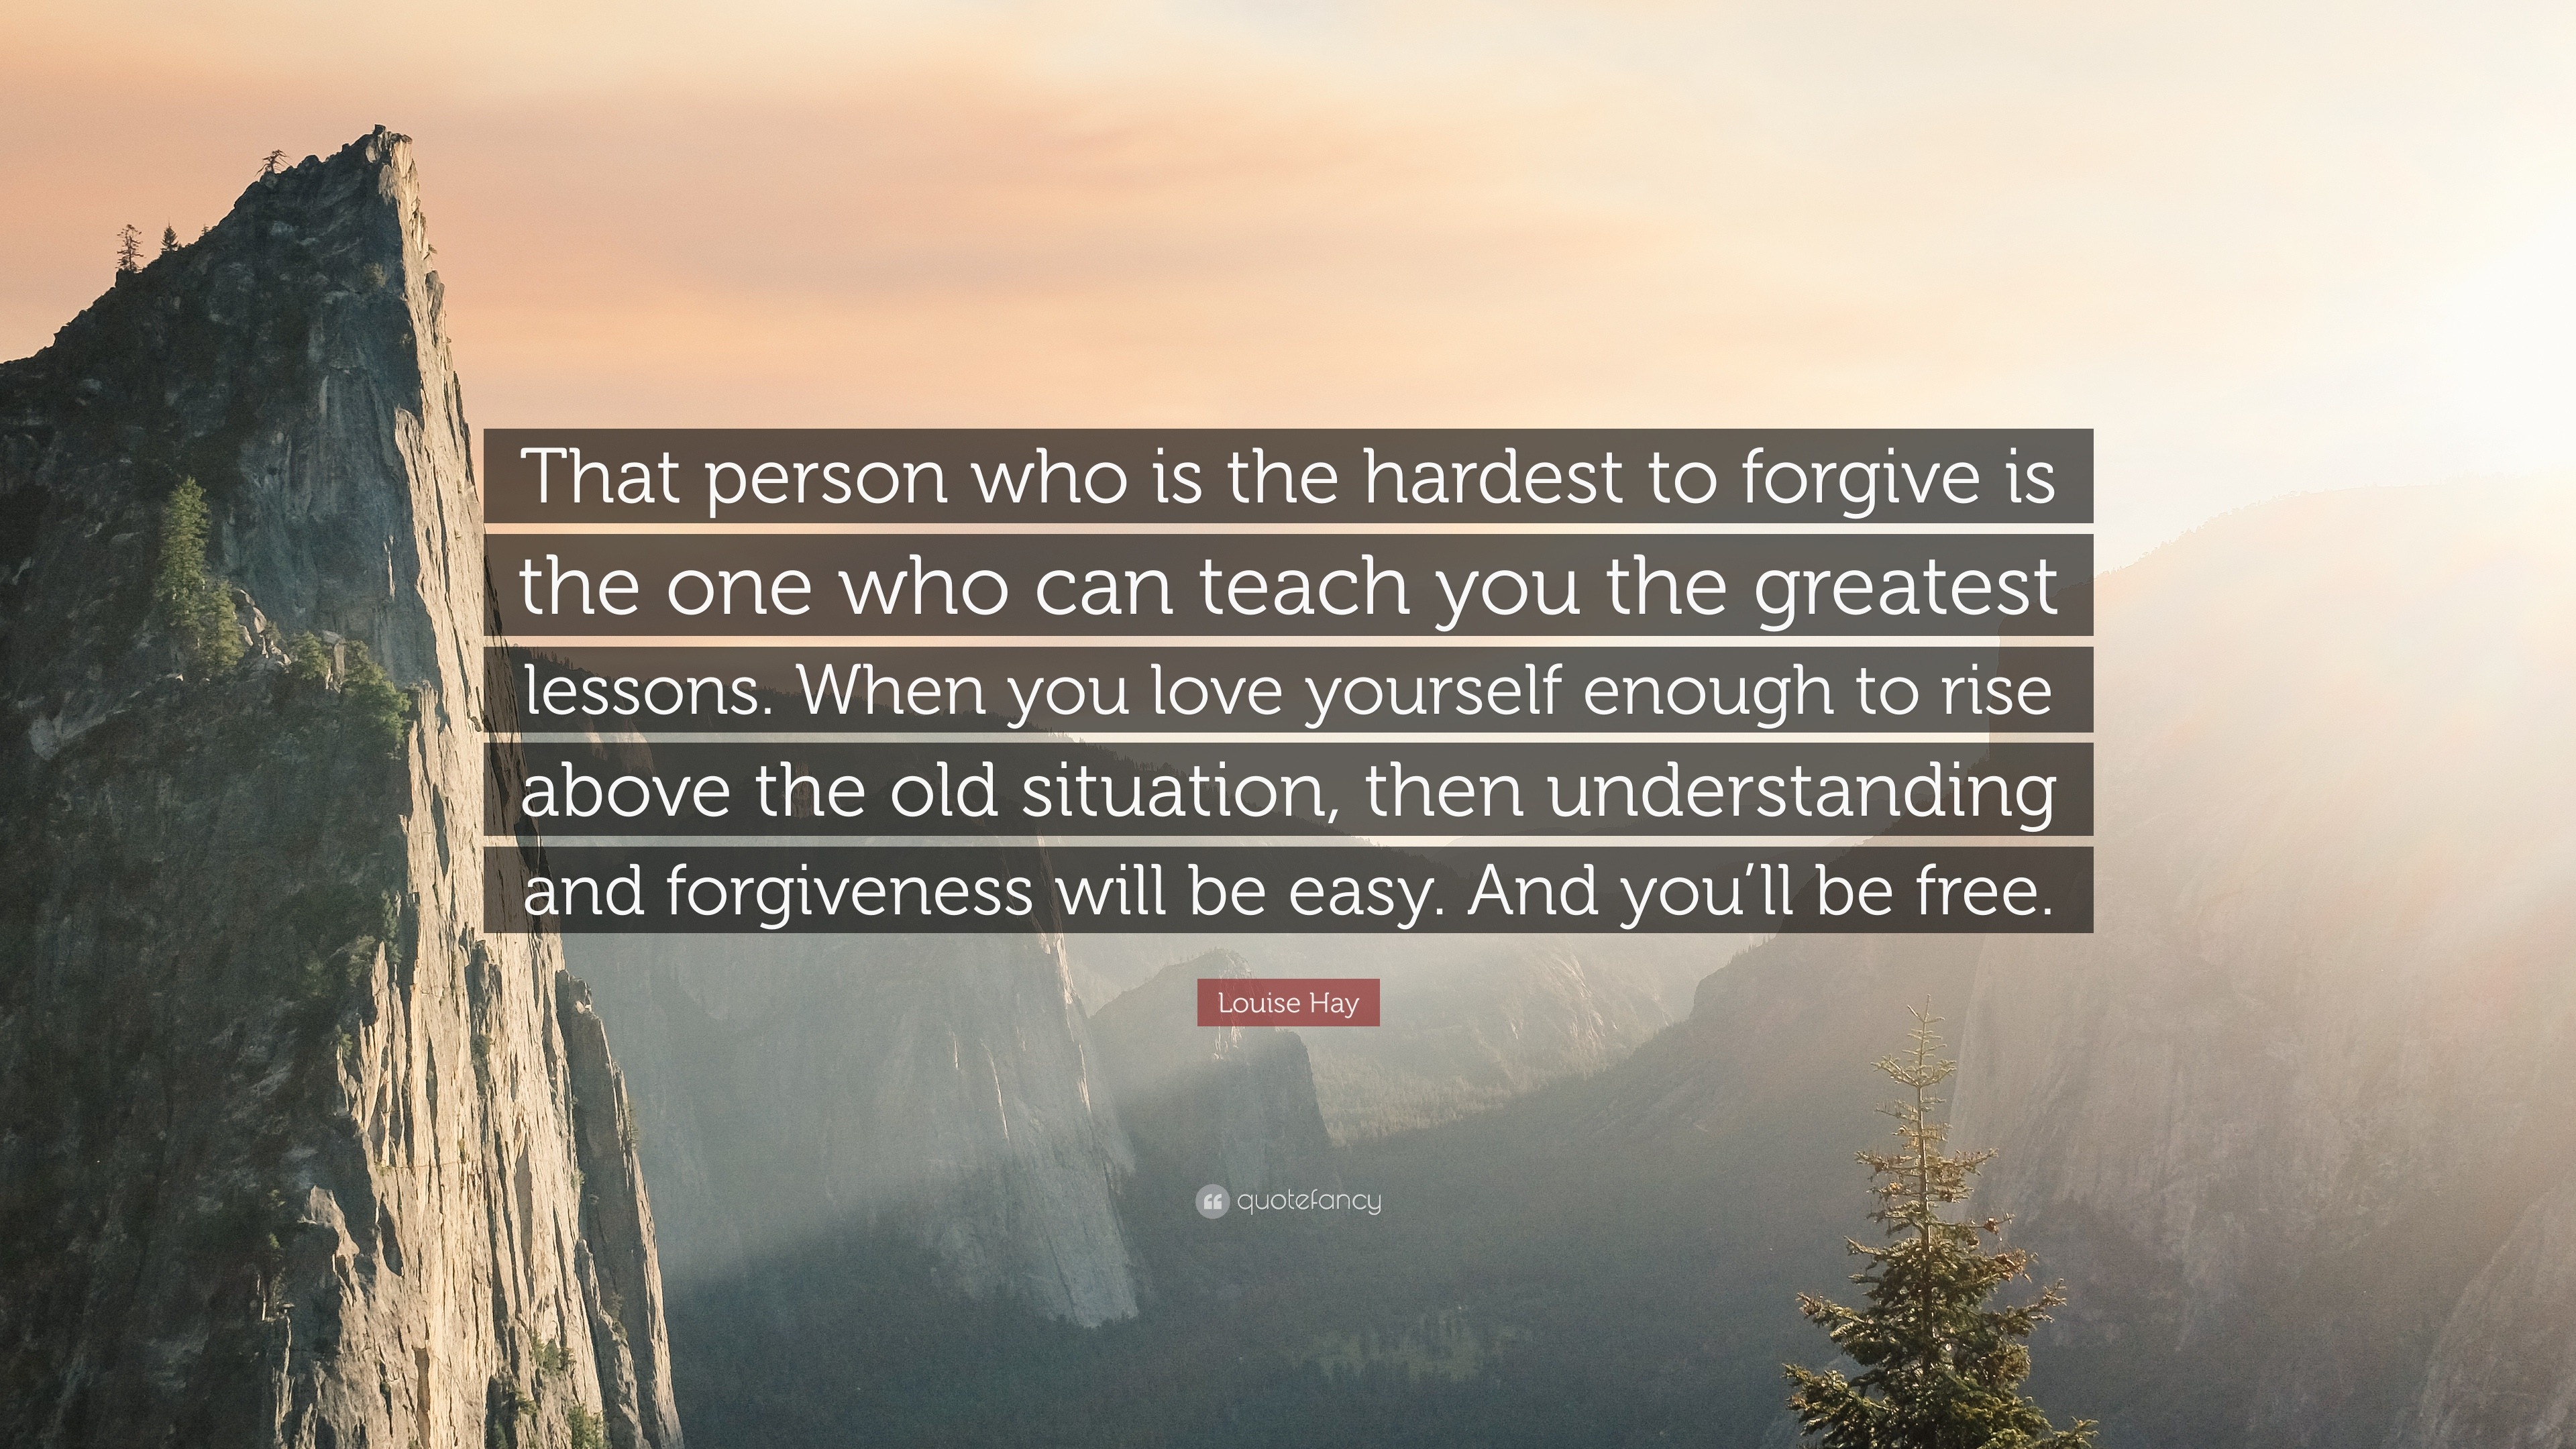 Louise Hay Quote “That person who is the hardest to forgive is the one